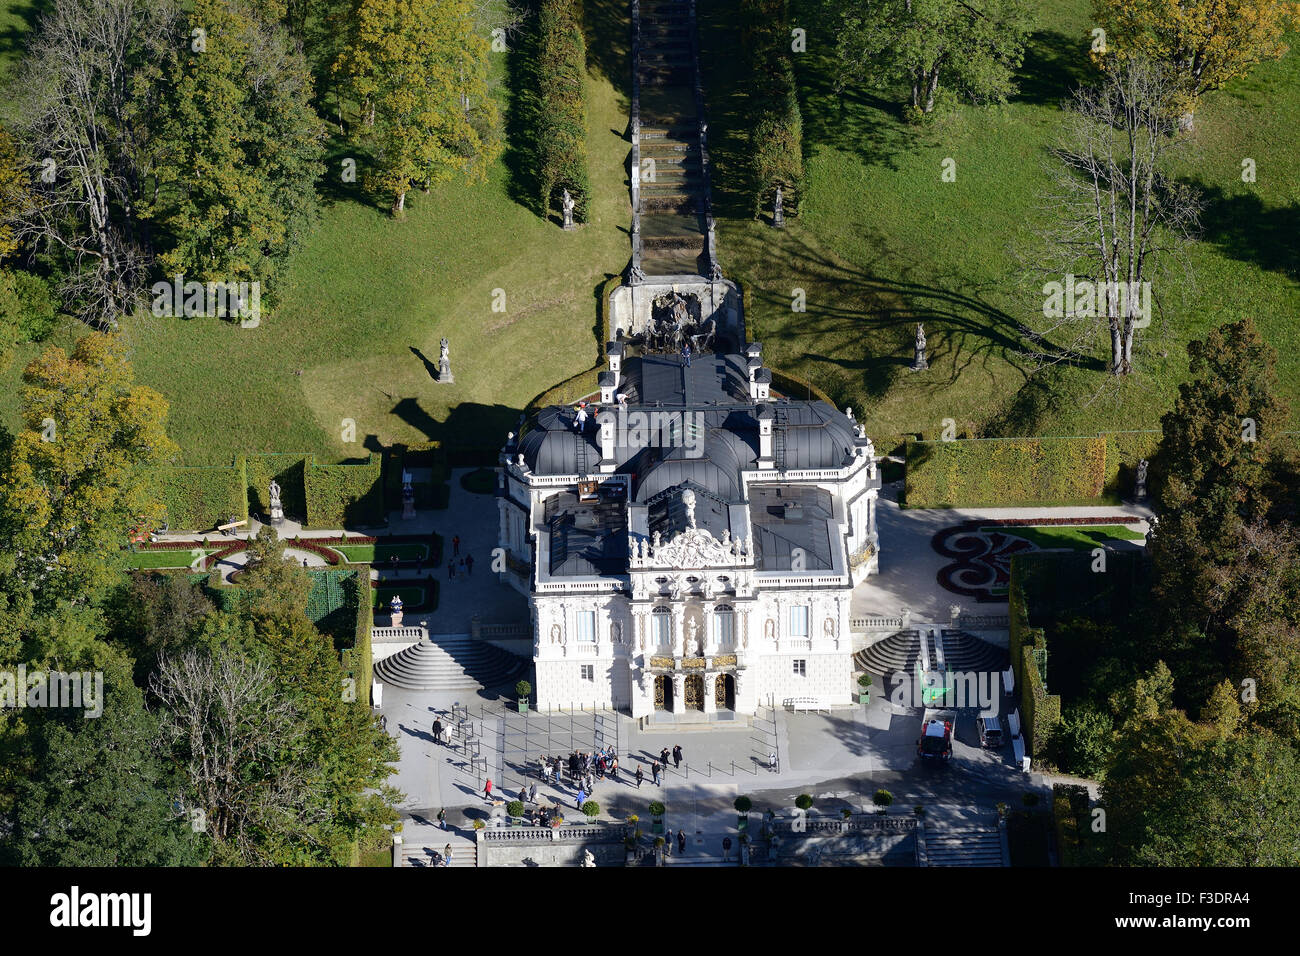 AERIAL VIEW. Linderhof Palace, one of the three residences of King Ludwig II. Linderhof, district of Garmisch-Partenkirchen, Bavaria, Germany. Stock Photo